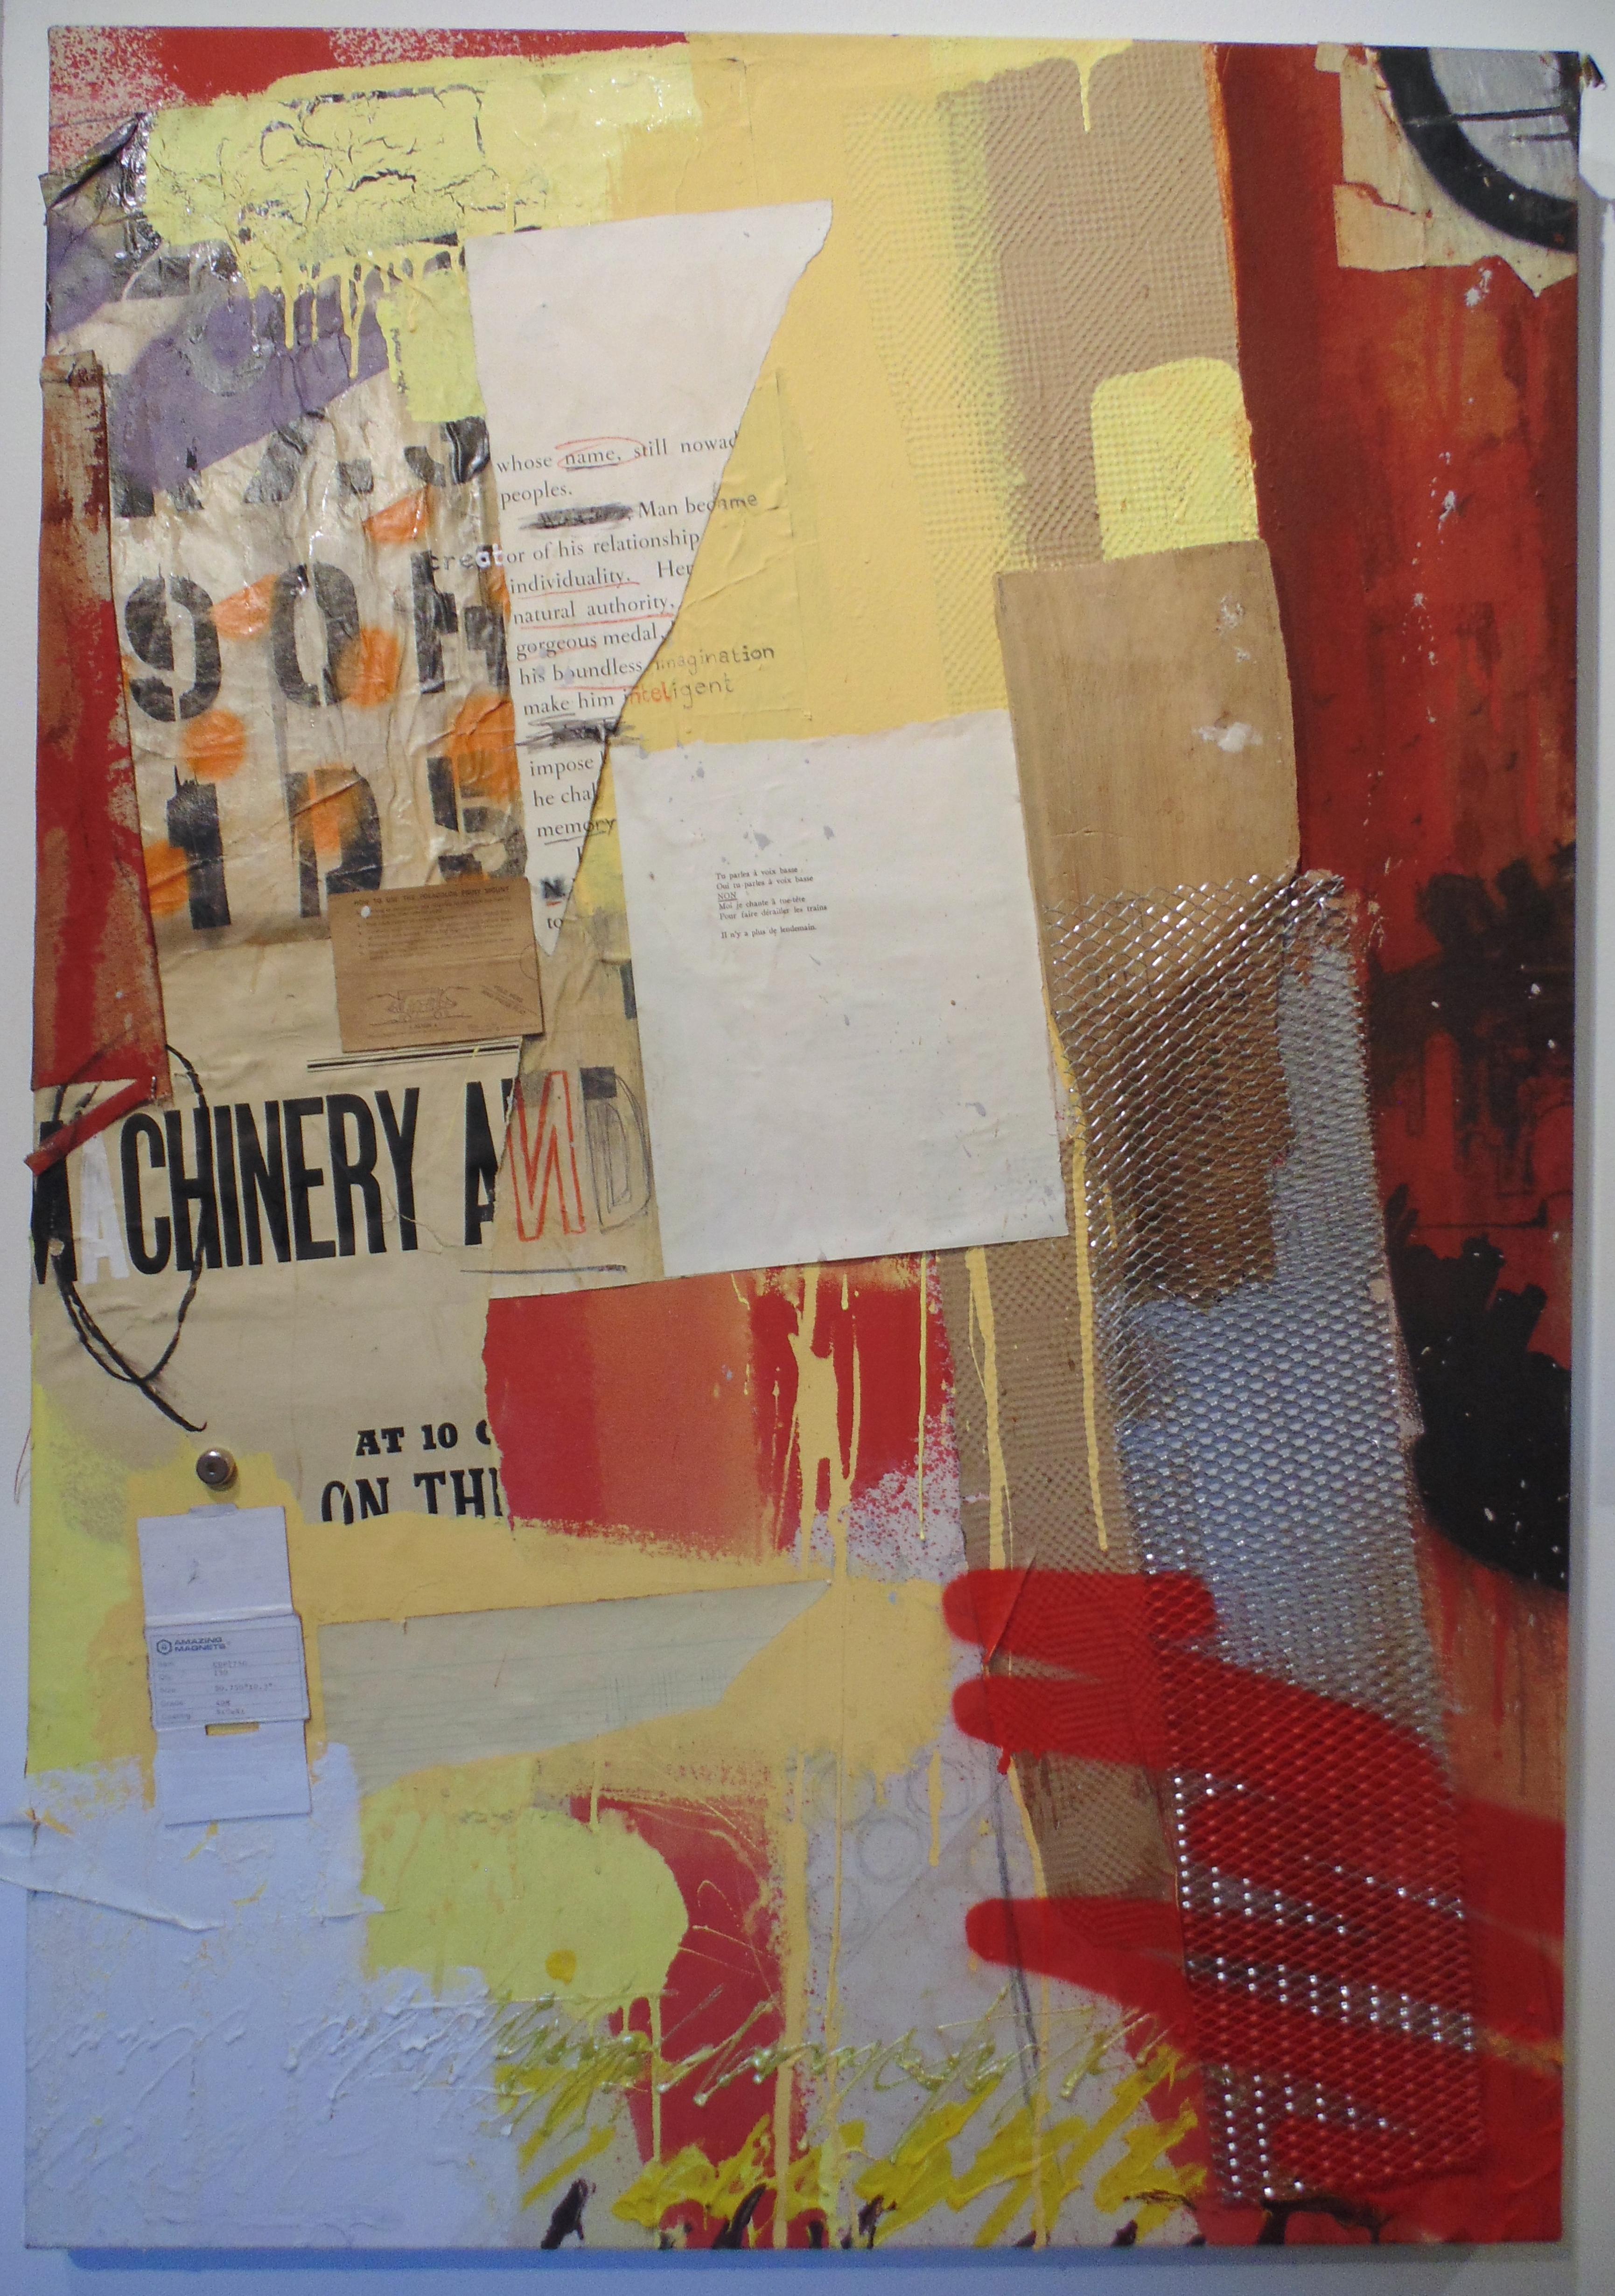 Number 2, 2014, graffiti, street art, abstract, text, collage, red, yellow - Mixed Media Art by Unknown